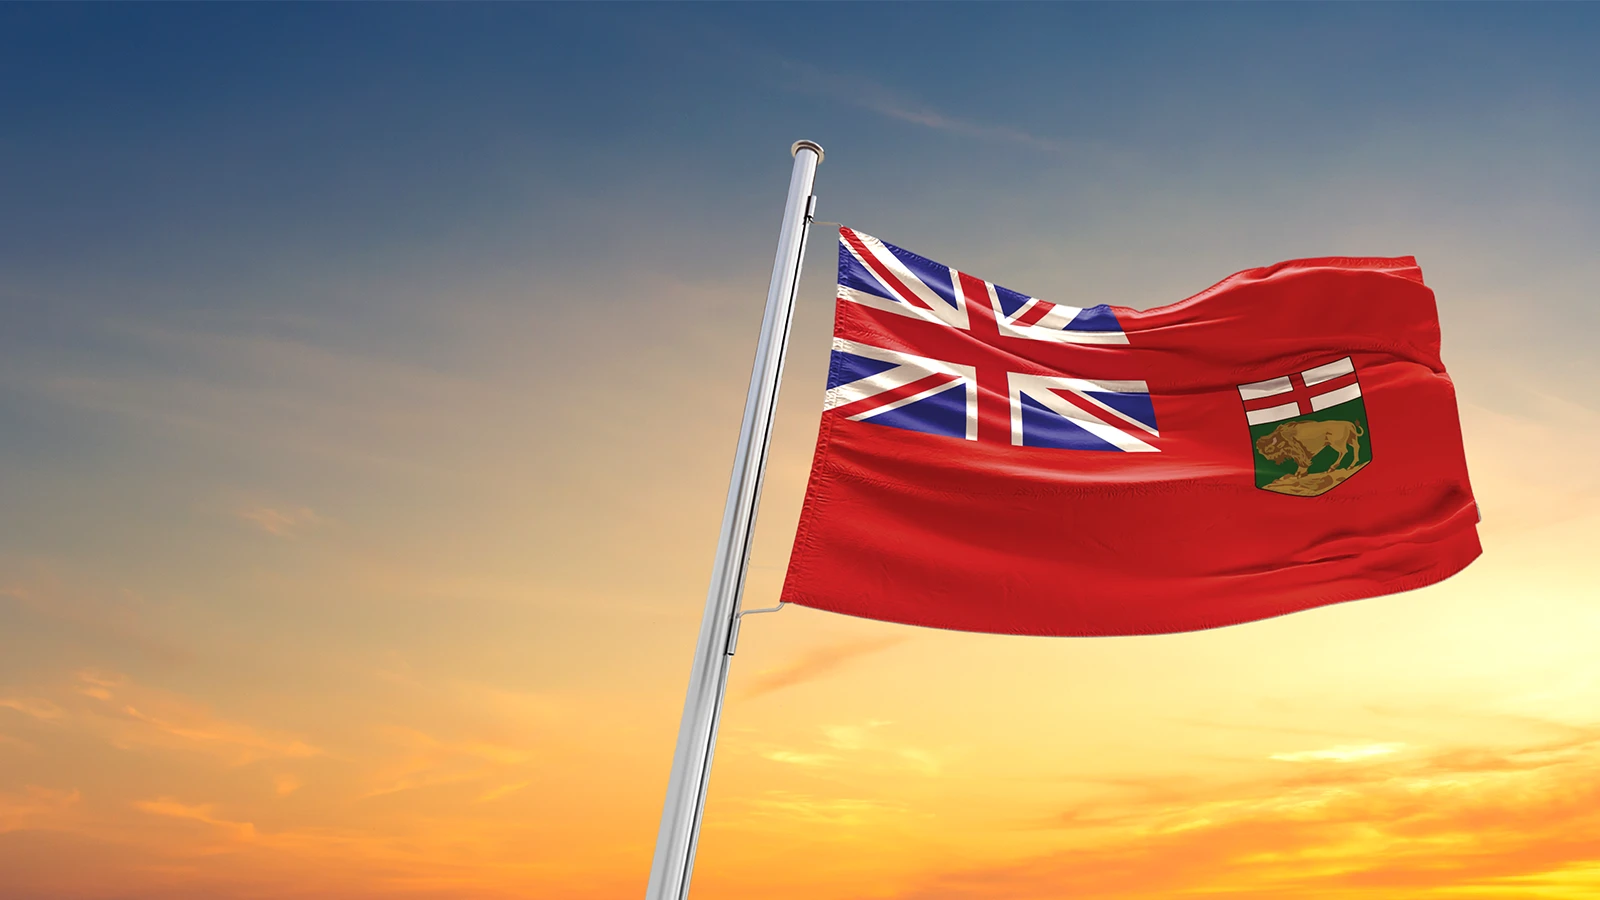 Manitoba flag blowing in wind with sunset background